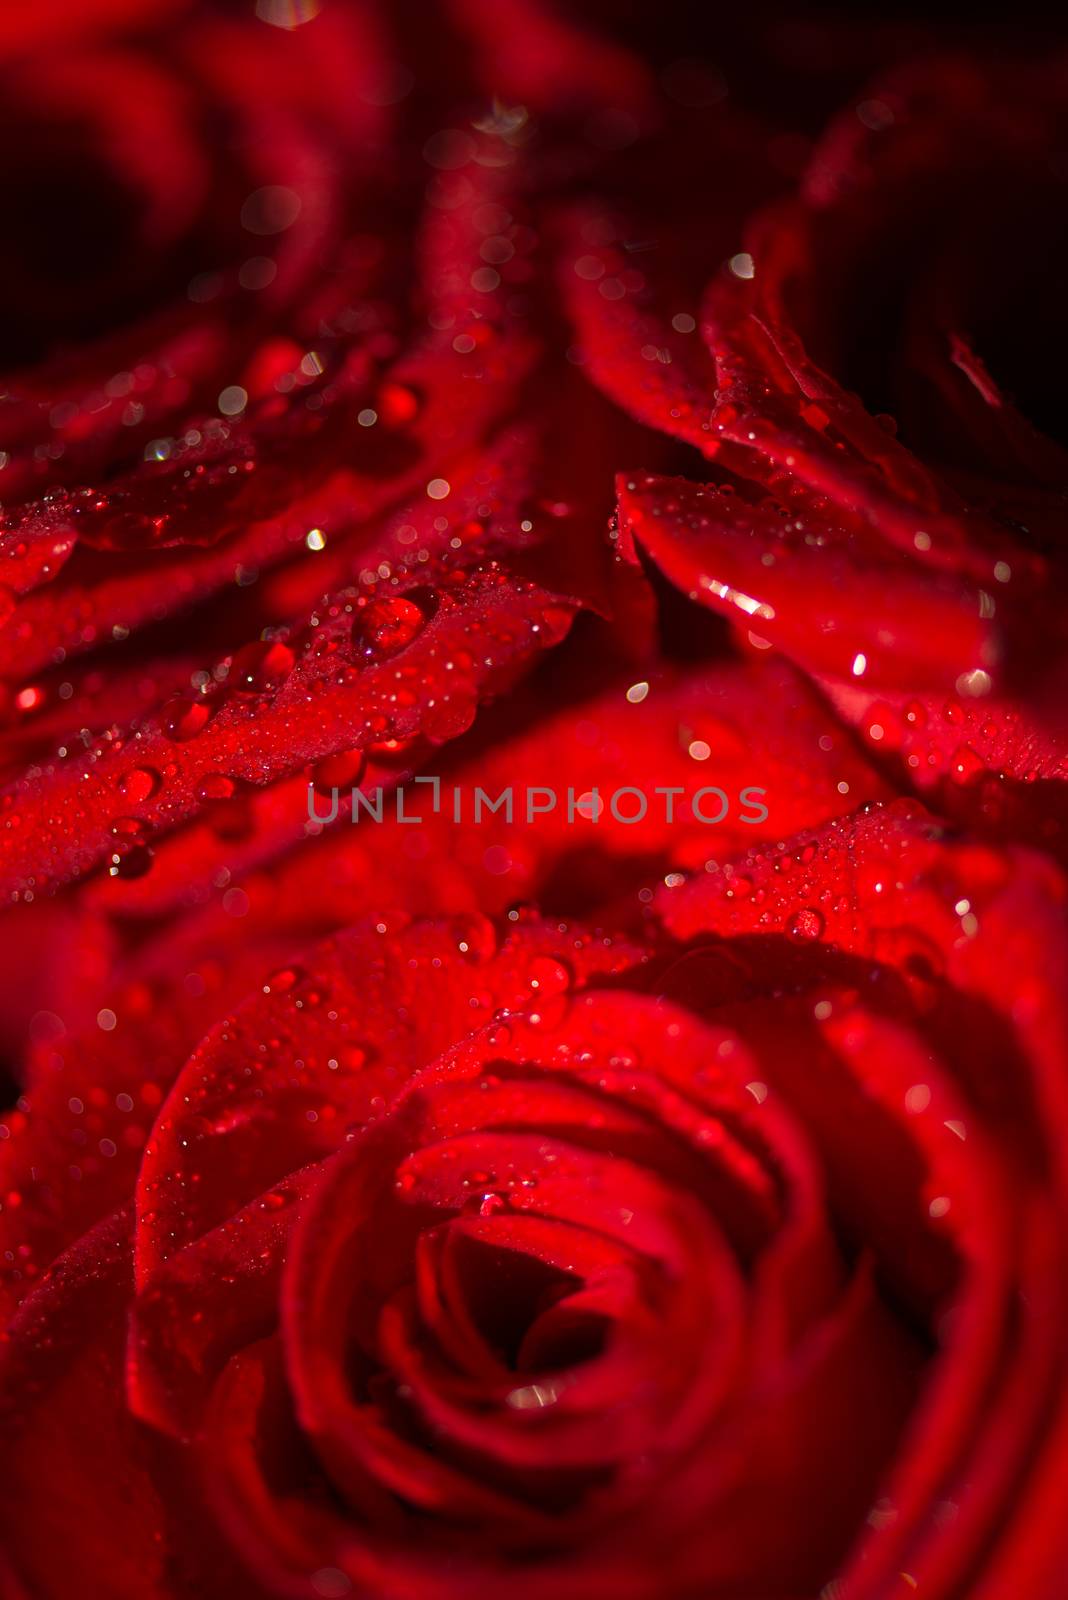 Macro photo of a rose with water droplets by skrotov